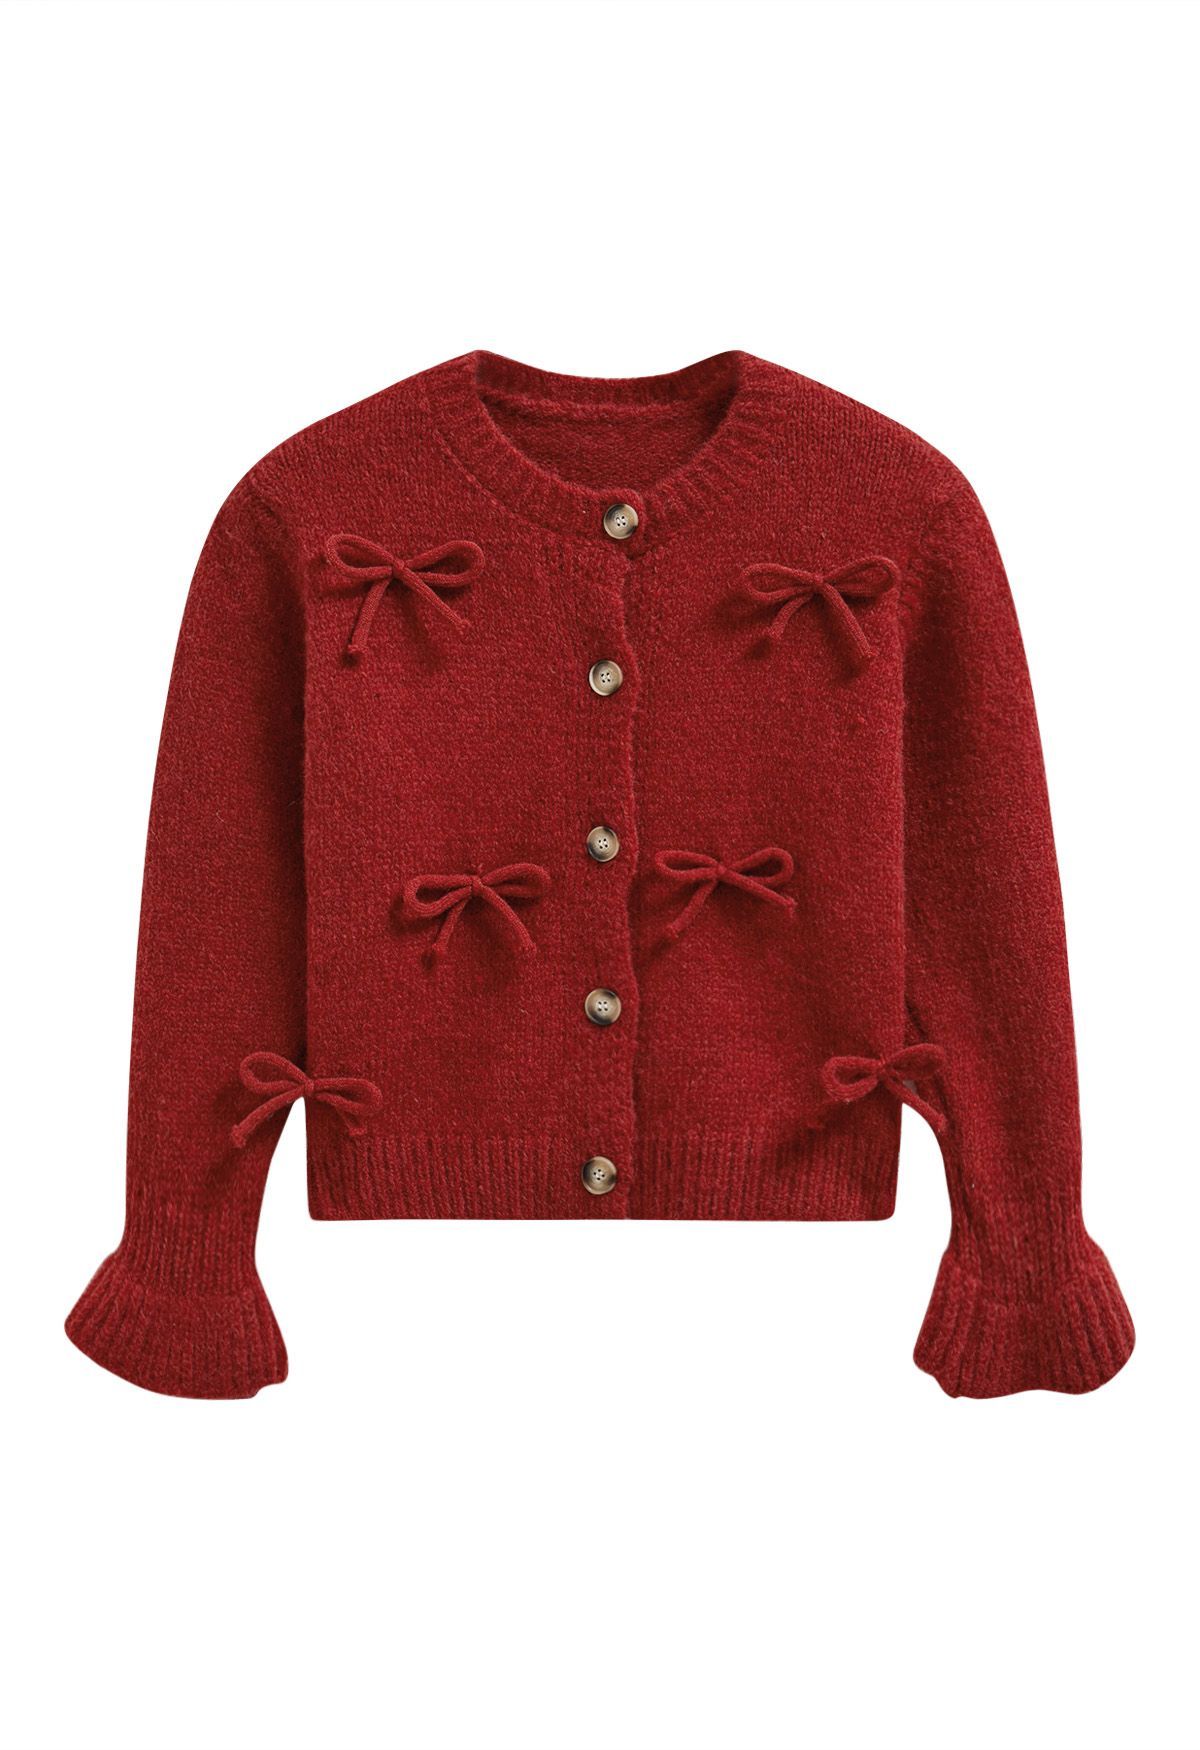 Adorable Bowknot Buttoned Knit Cardigan in Red | Chicwish